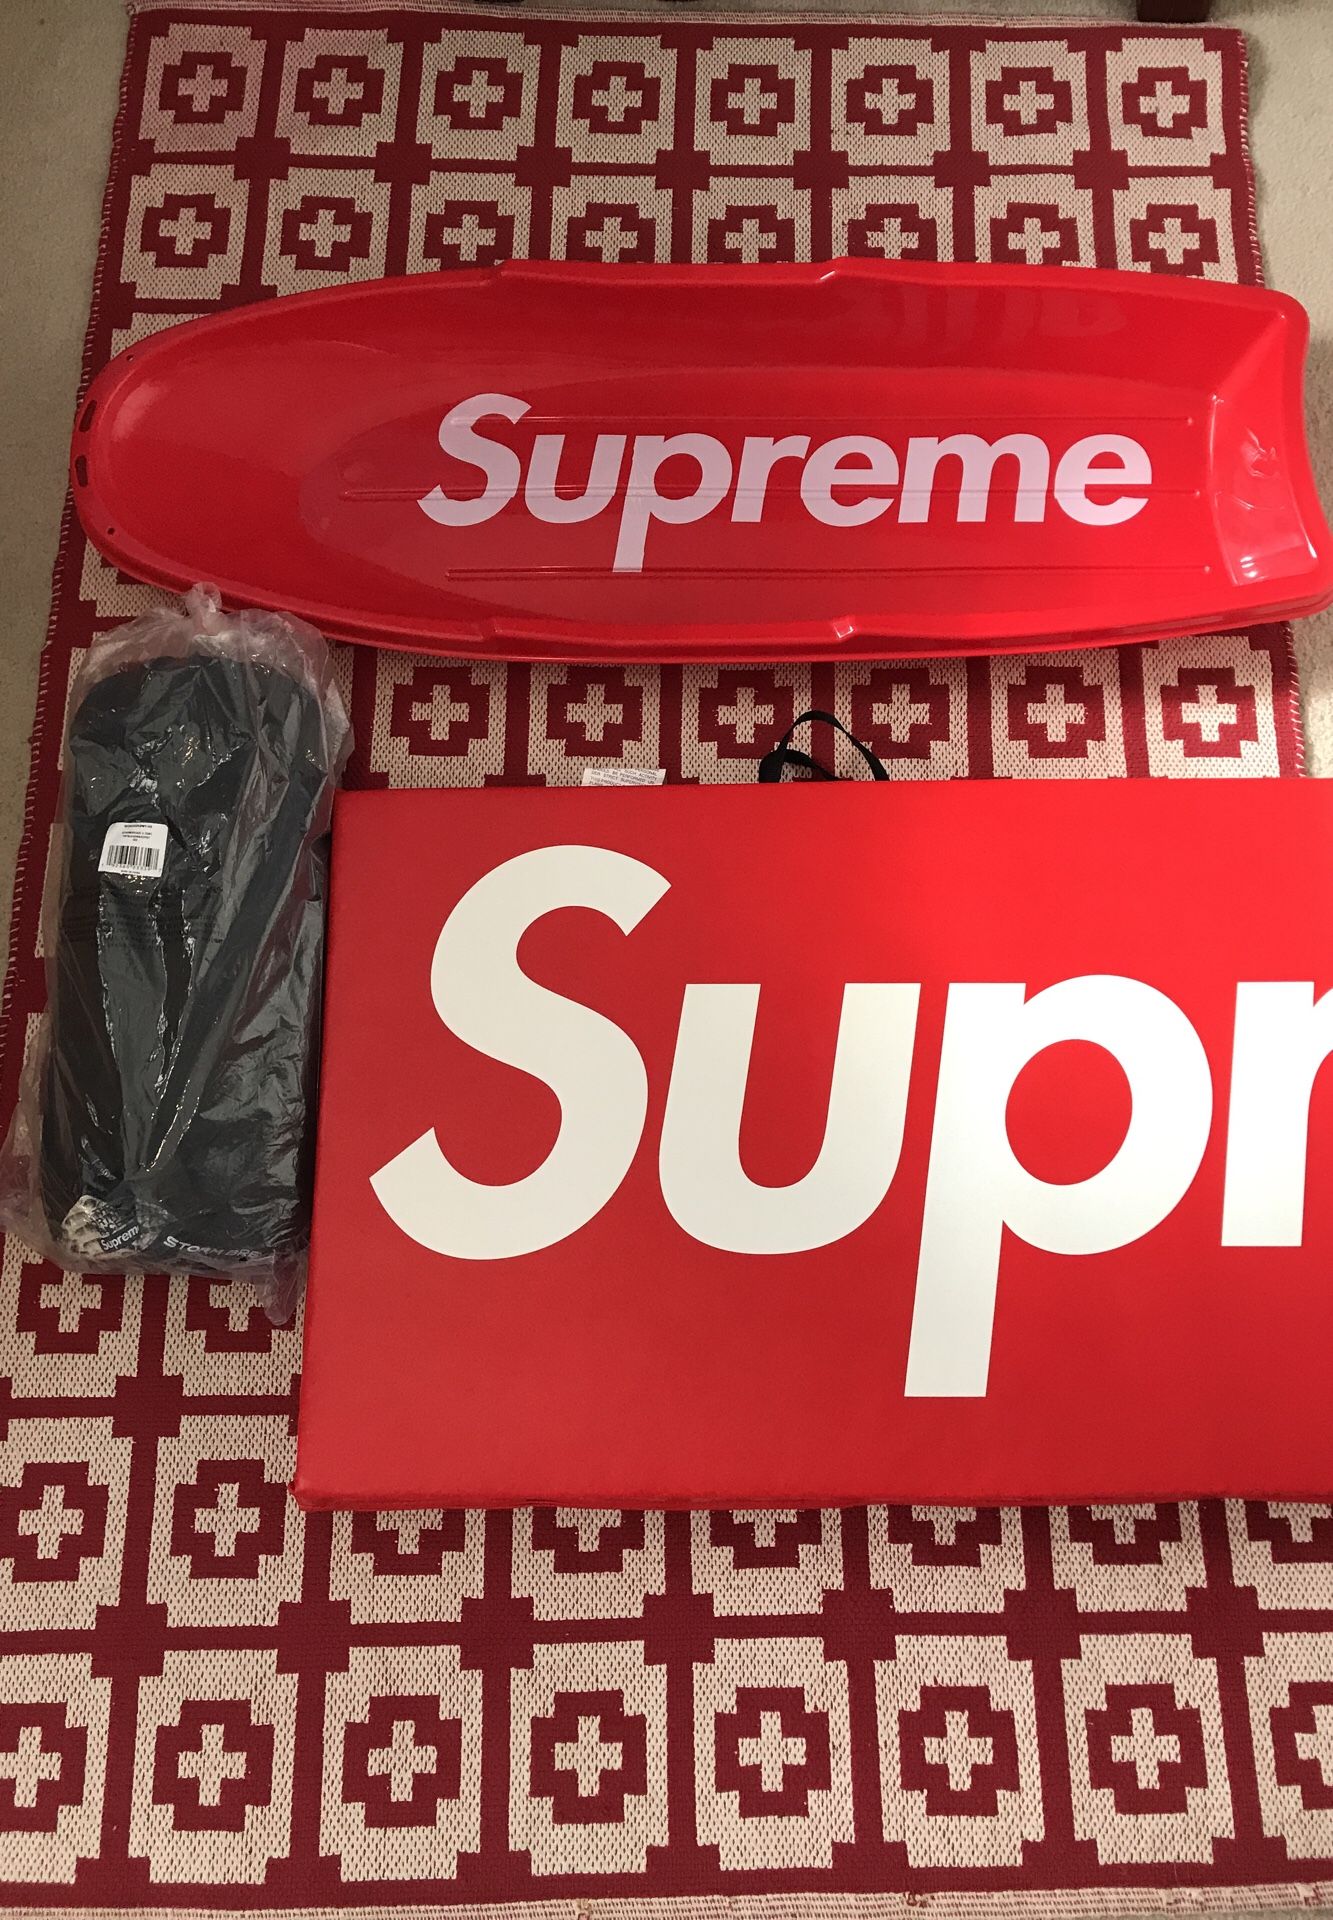 Supreme North Face sled, exercise is yoga mat, and storm break 3 tent